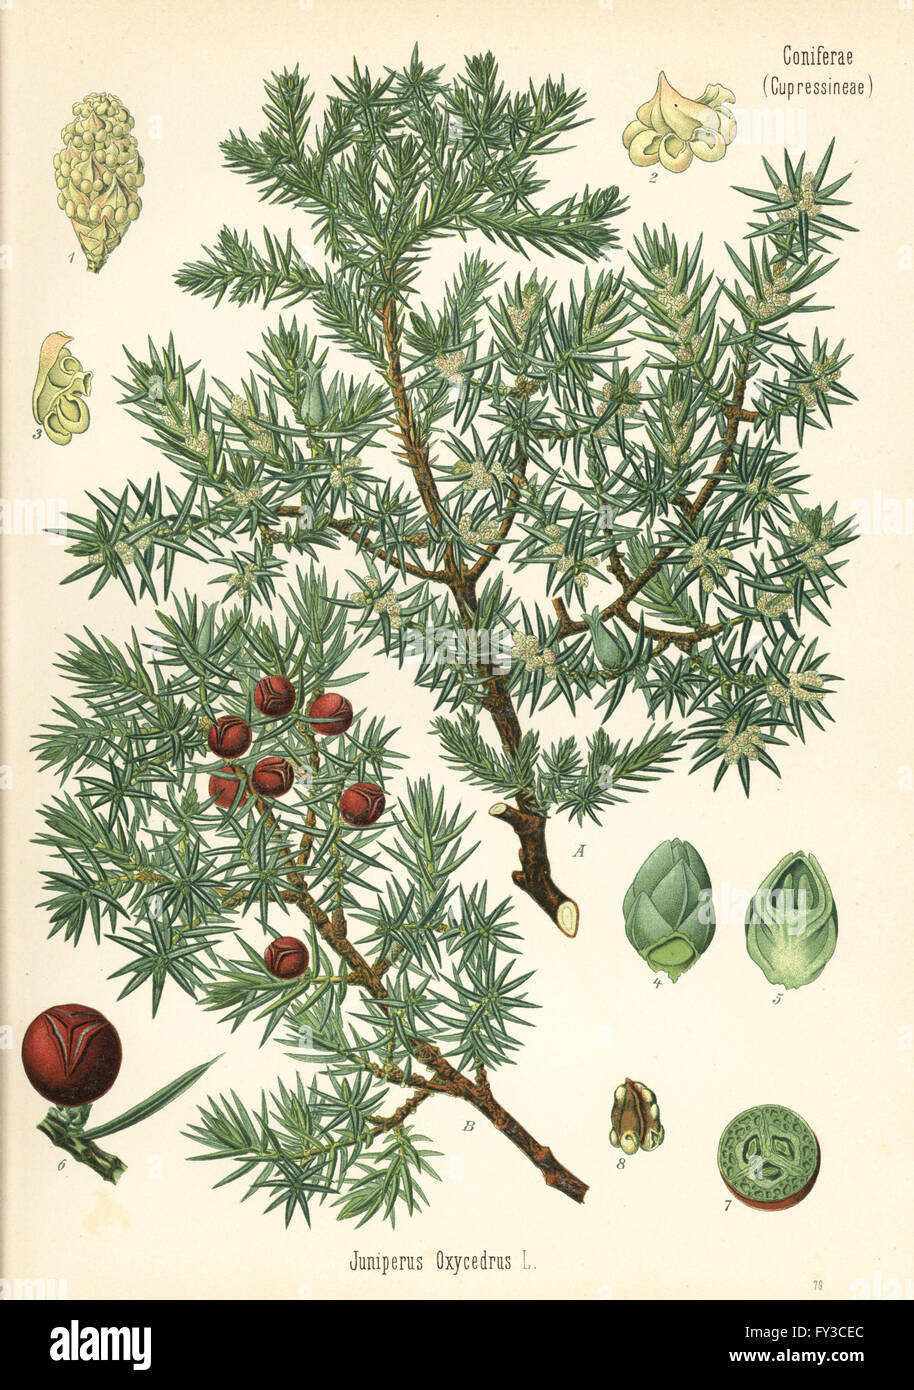 Prickly juniper, Juniperus oxycedrus. Chromolithograph after a botanical illustration from Hermann Adolph Koehler's Medicinal Plants, edited by Gustav Pabst, Koehler, Germany, 1887. Stock Photo